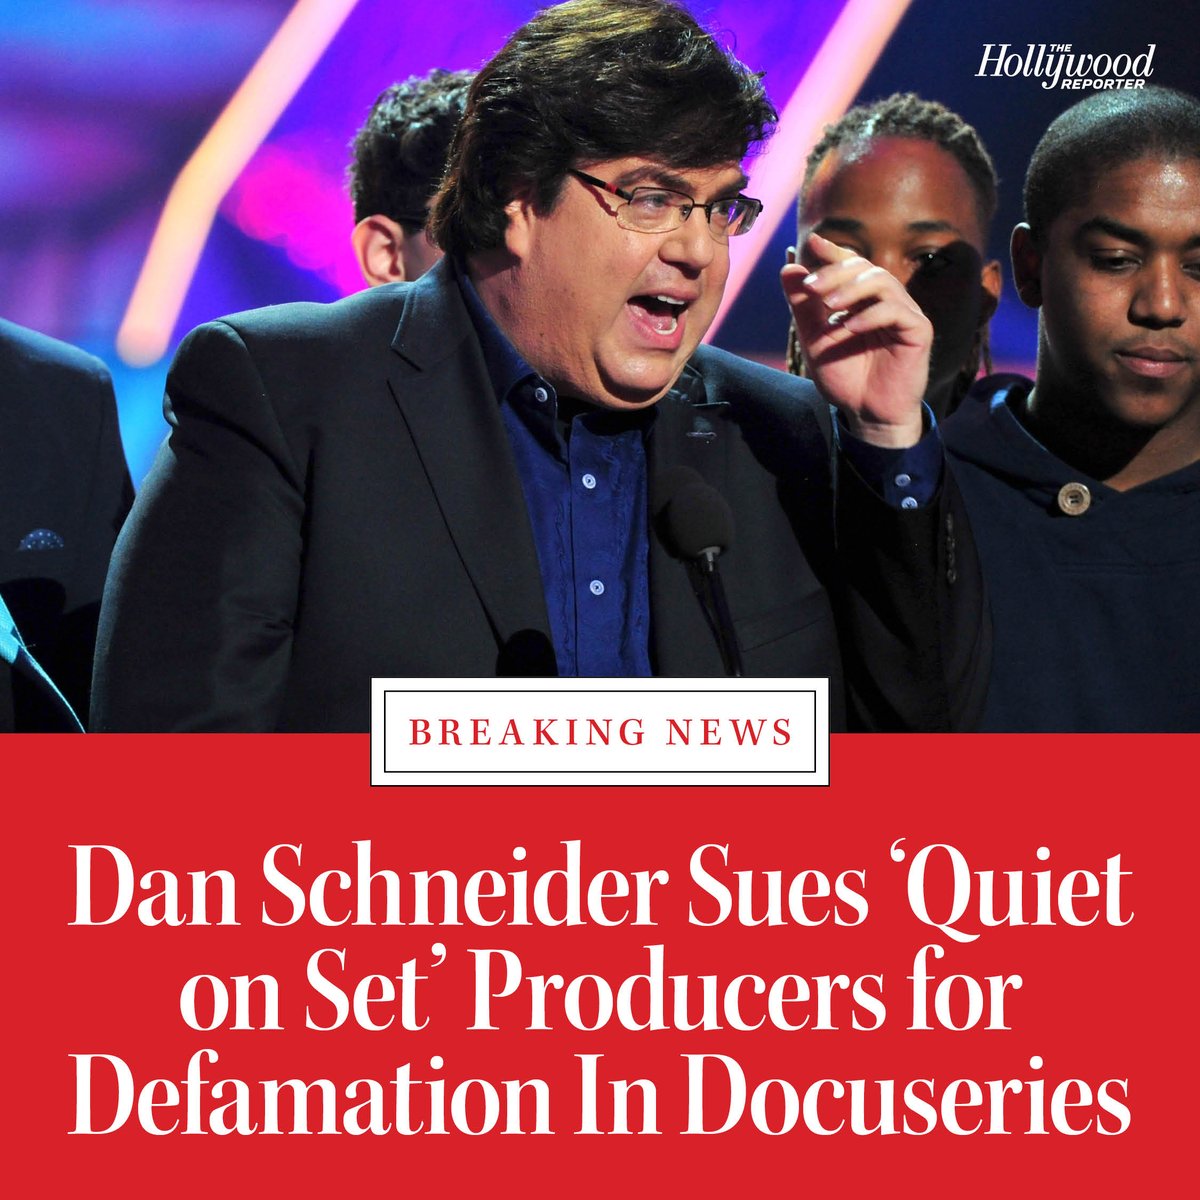 Dan Schneider has sued Investigation Discovery for defamation over his portrayal in 'Quiet on Set,' accusing the company of falsely implying that he sexually abused children who worked Nickelodeon series he created and ran: thr.cm/eOft7IP